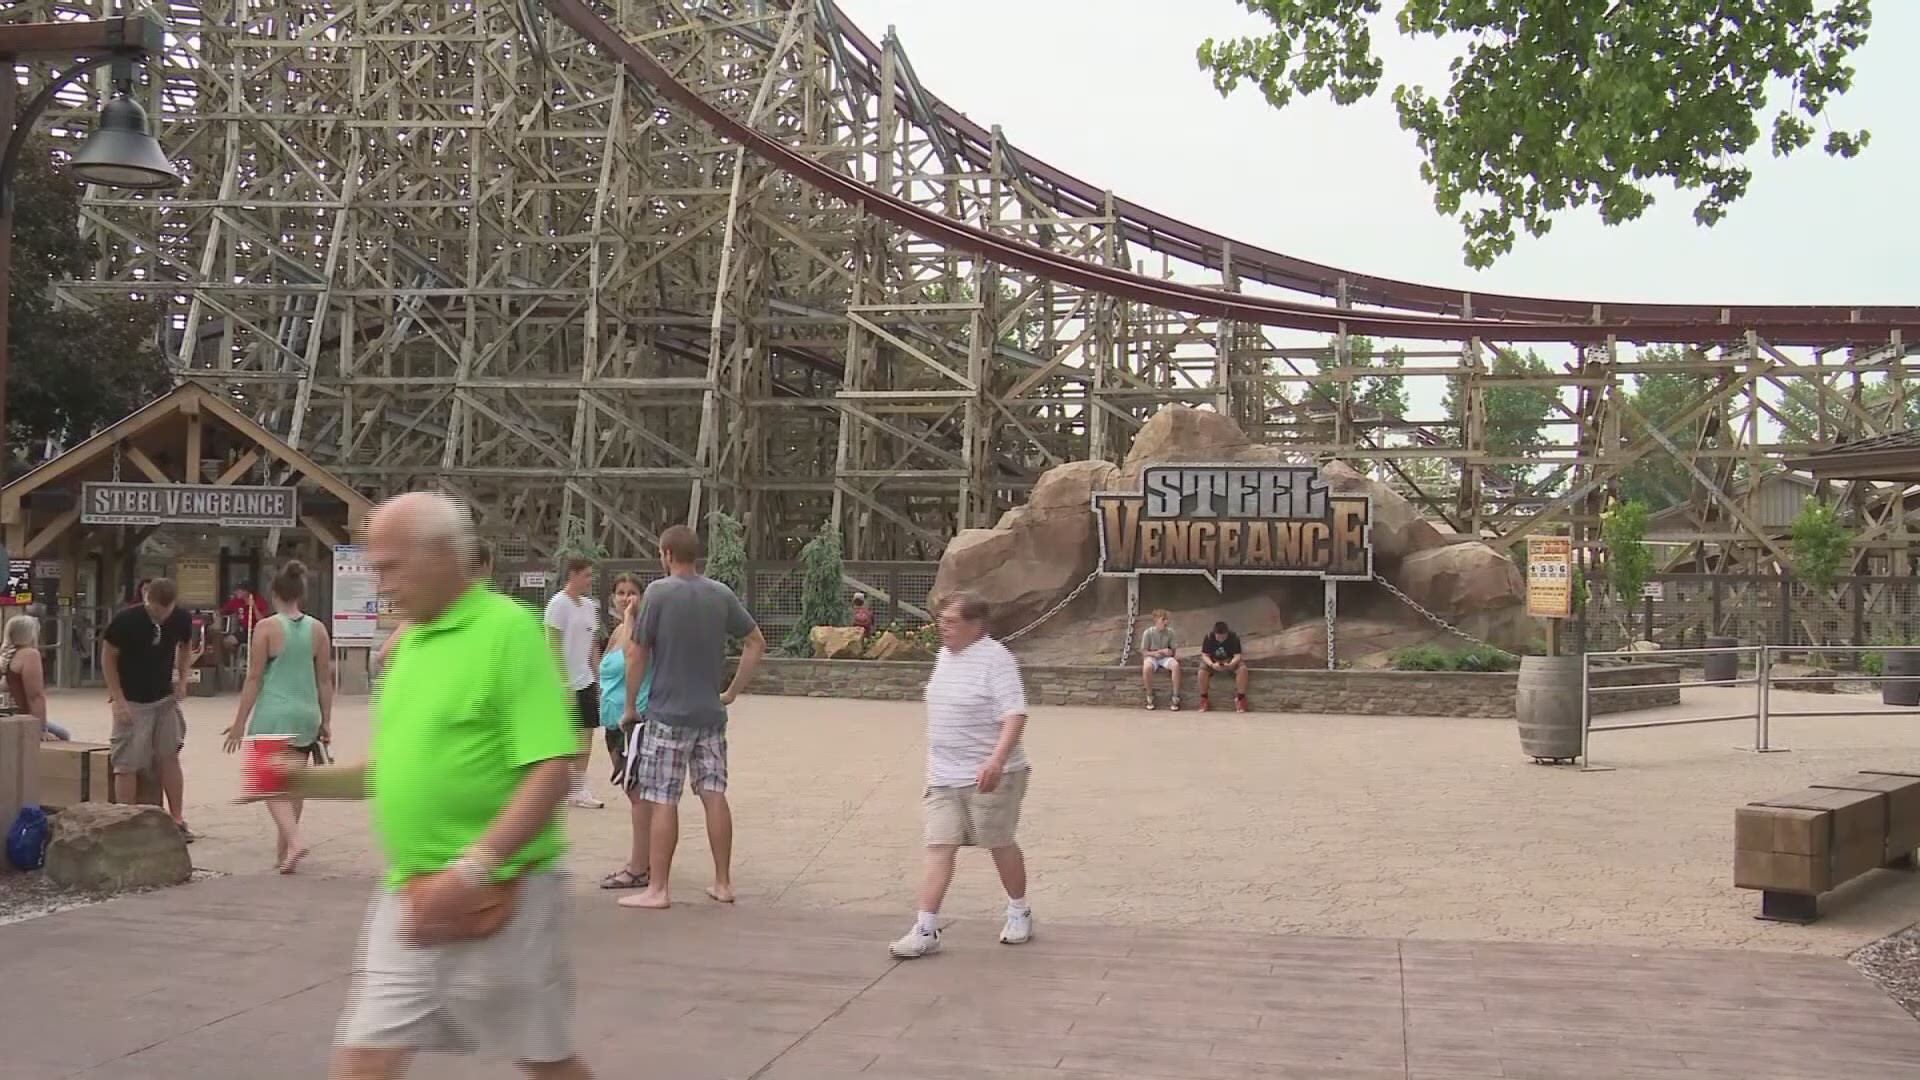 Gov. DeWine announced that Cedar Point and other state amusement parks and waterparks can open on June 19. That's the same date casinos and racinos can reopen.